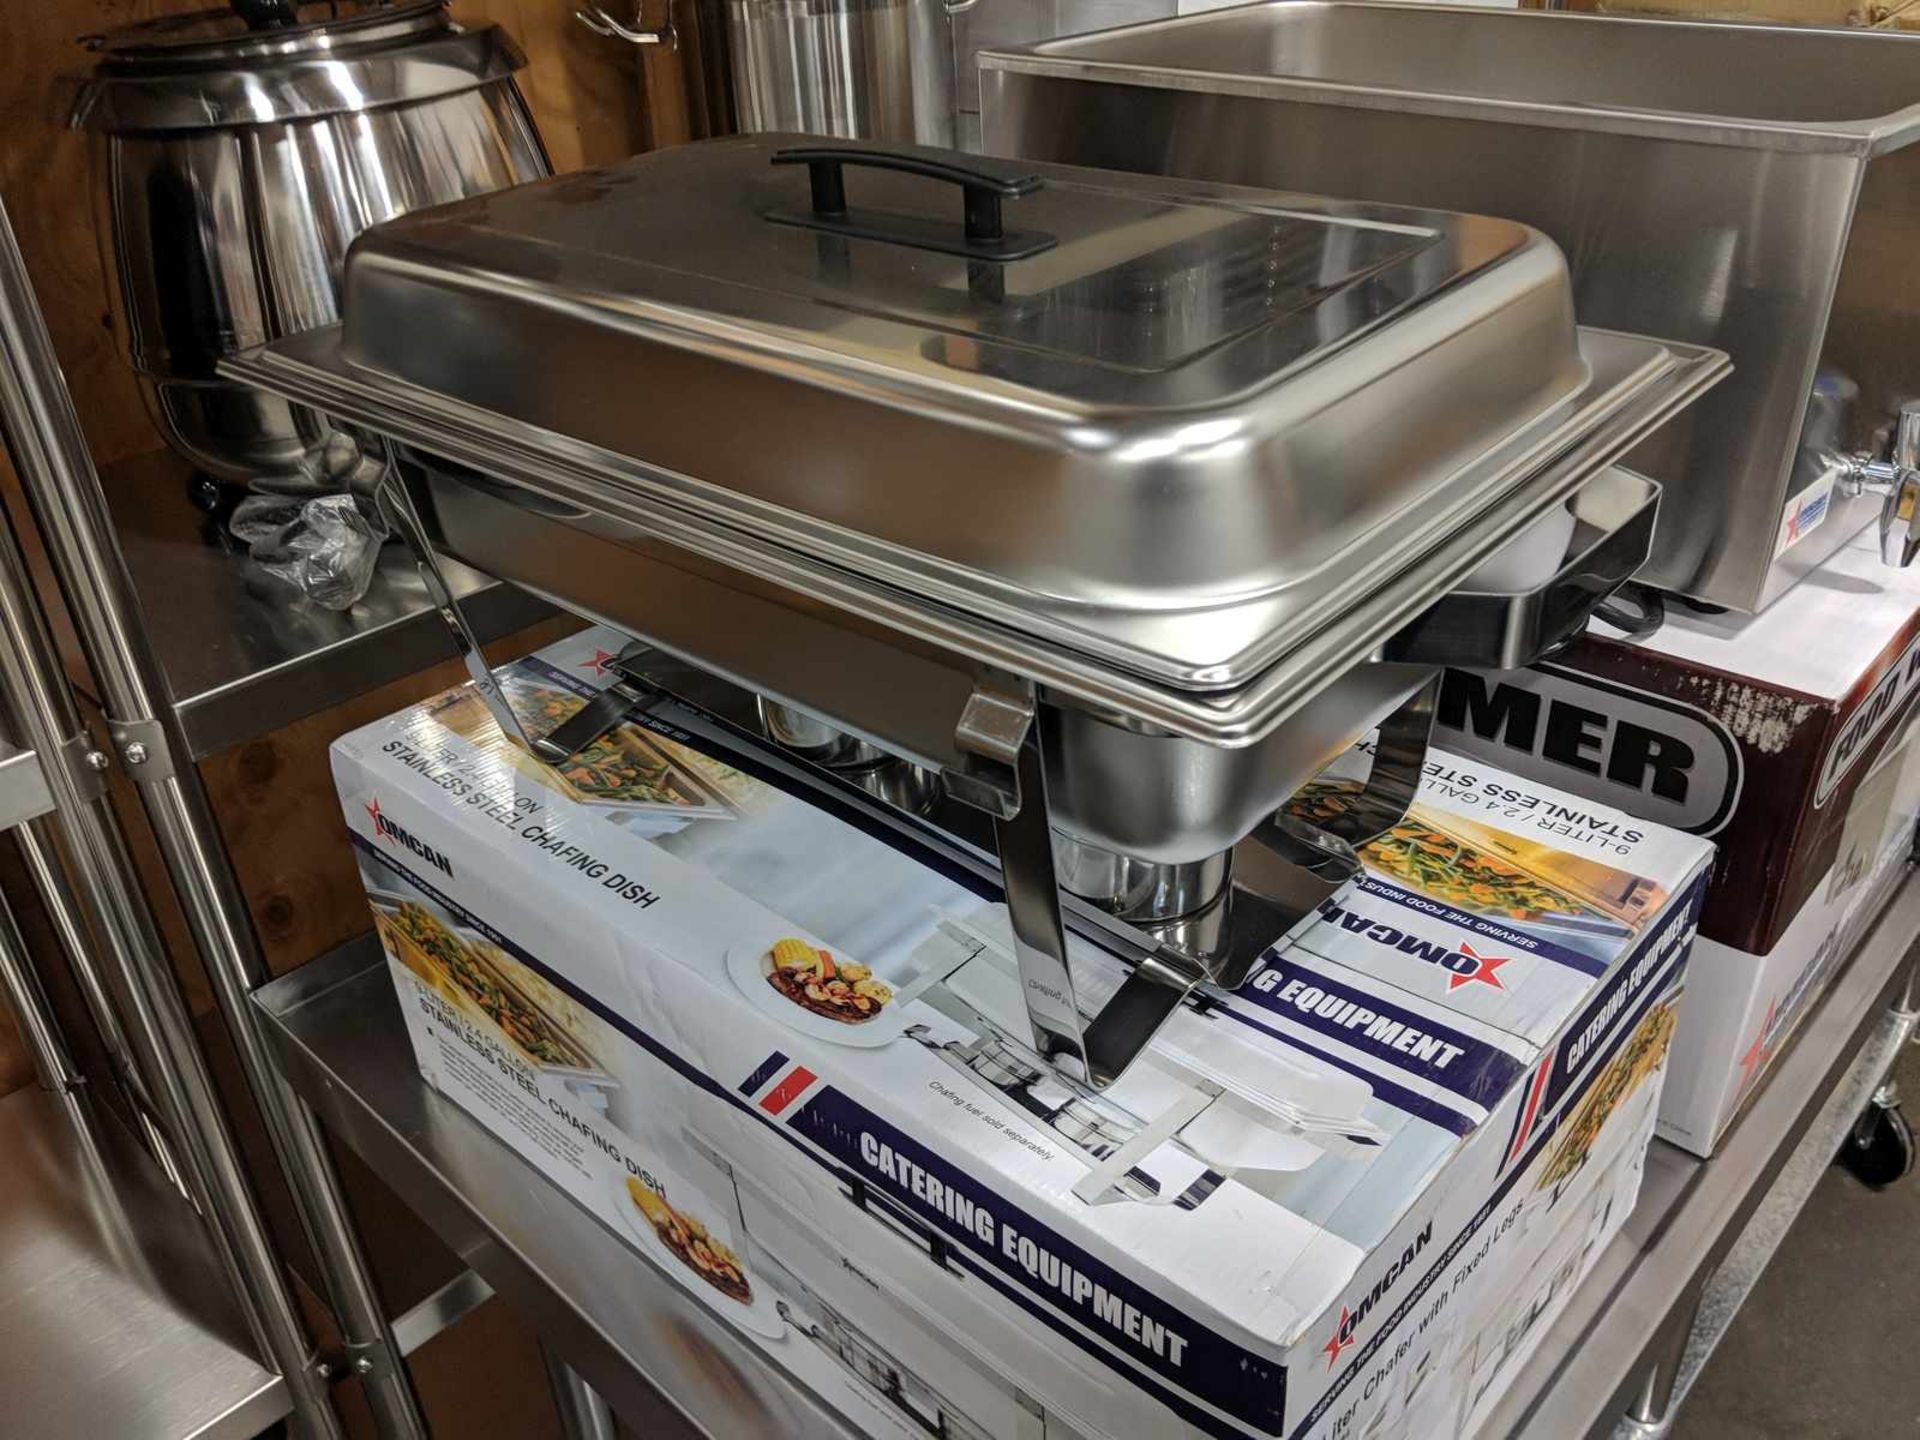 9L Stainless Chafing Dishes with Fixed Legs - Lot of 2 - Image 2 of 2